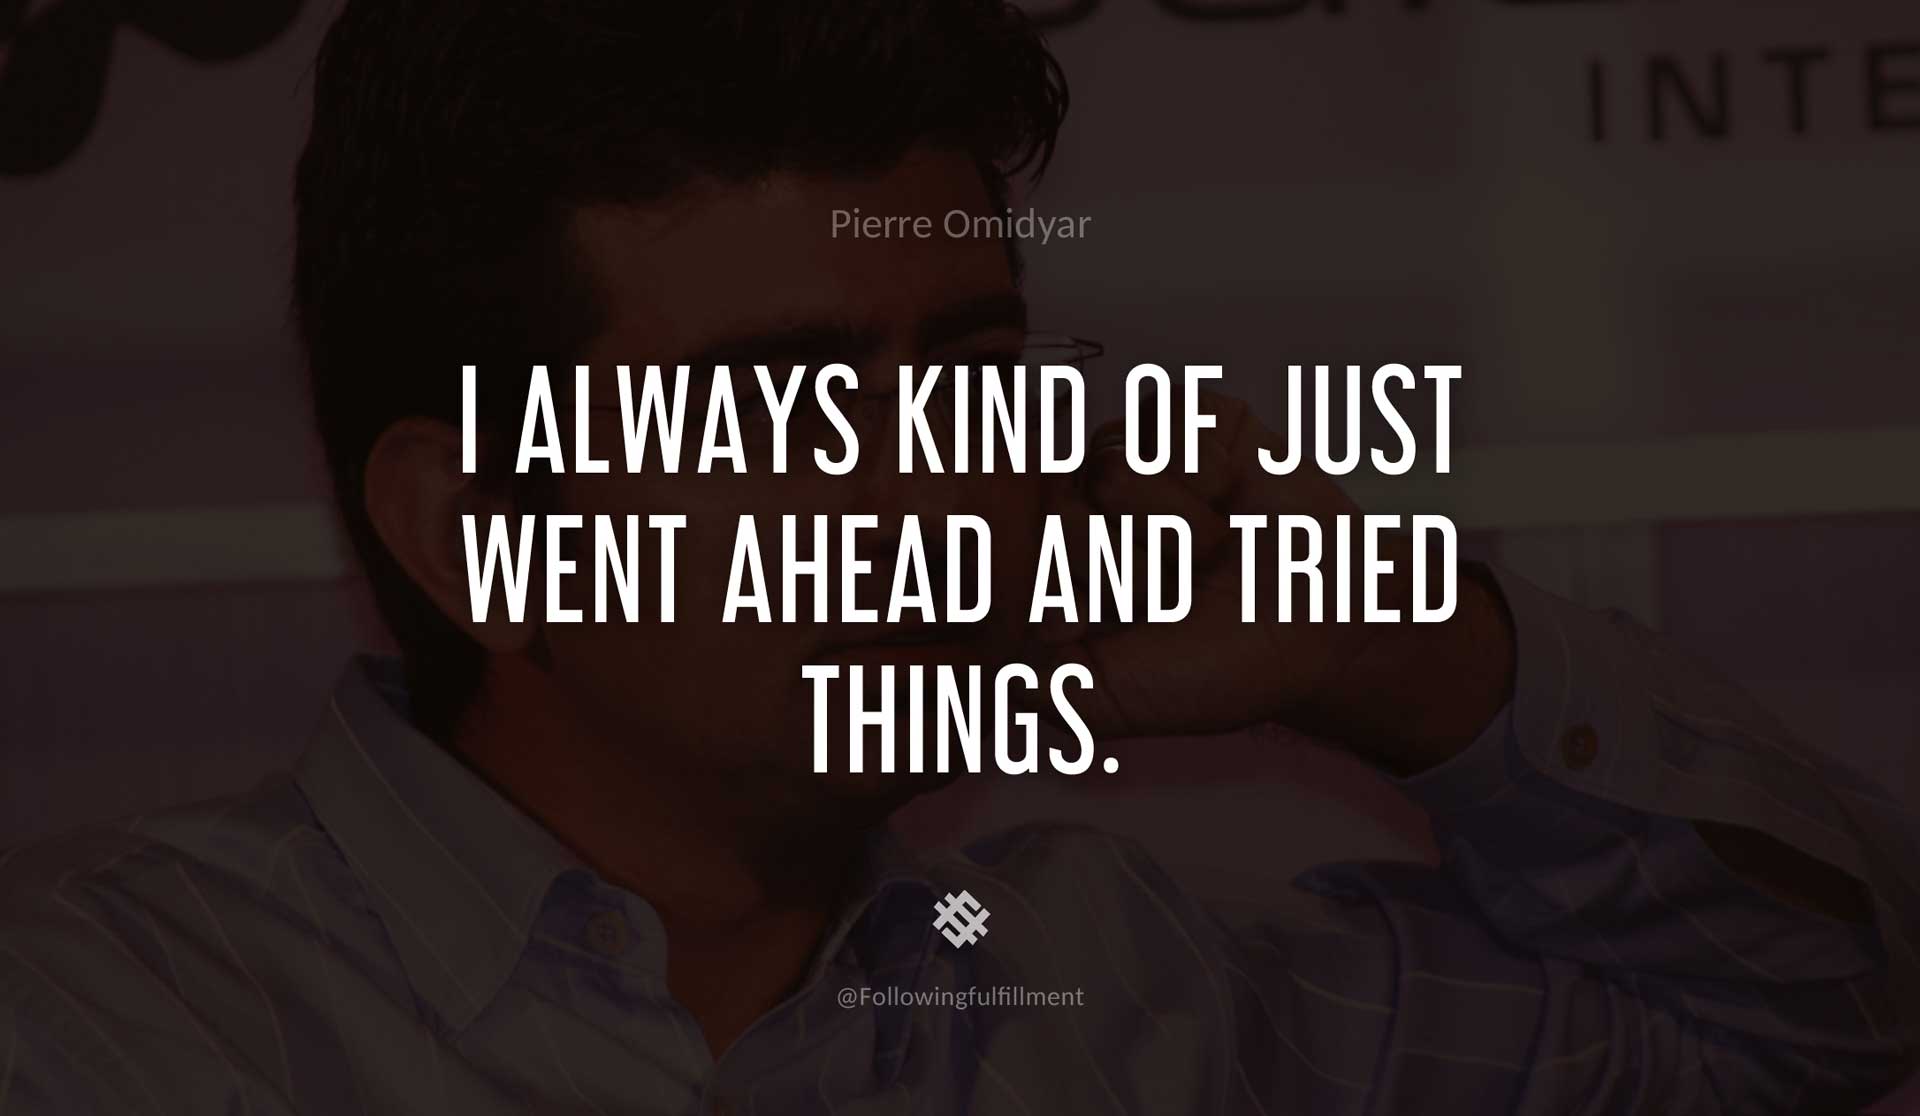 I-always-kind-of-just-went-ahead-and-tried-things.-PIERRE-OMIDYAR-Quote.jpg